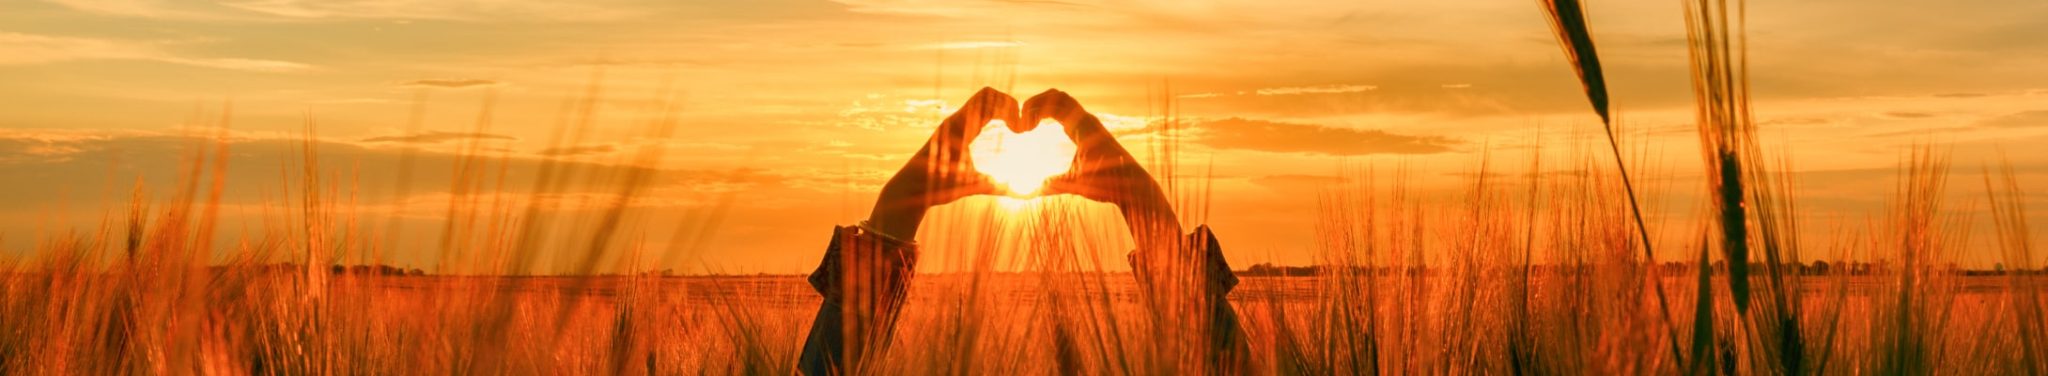 Person standing in a wheat field holding up their hands in a heart shape in front of a sunset or sunrise.